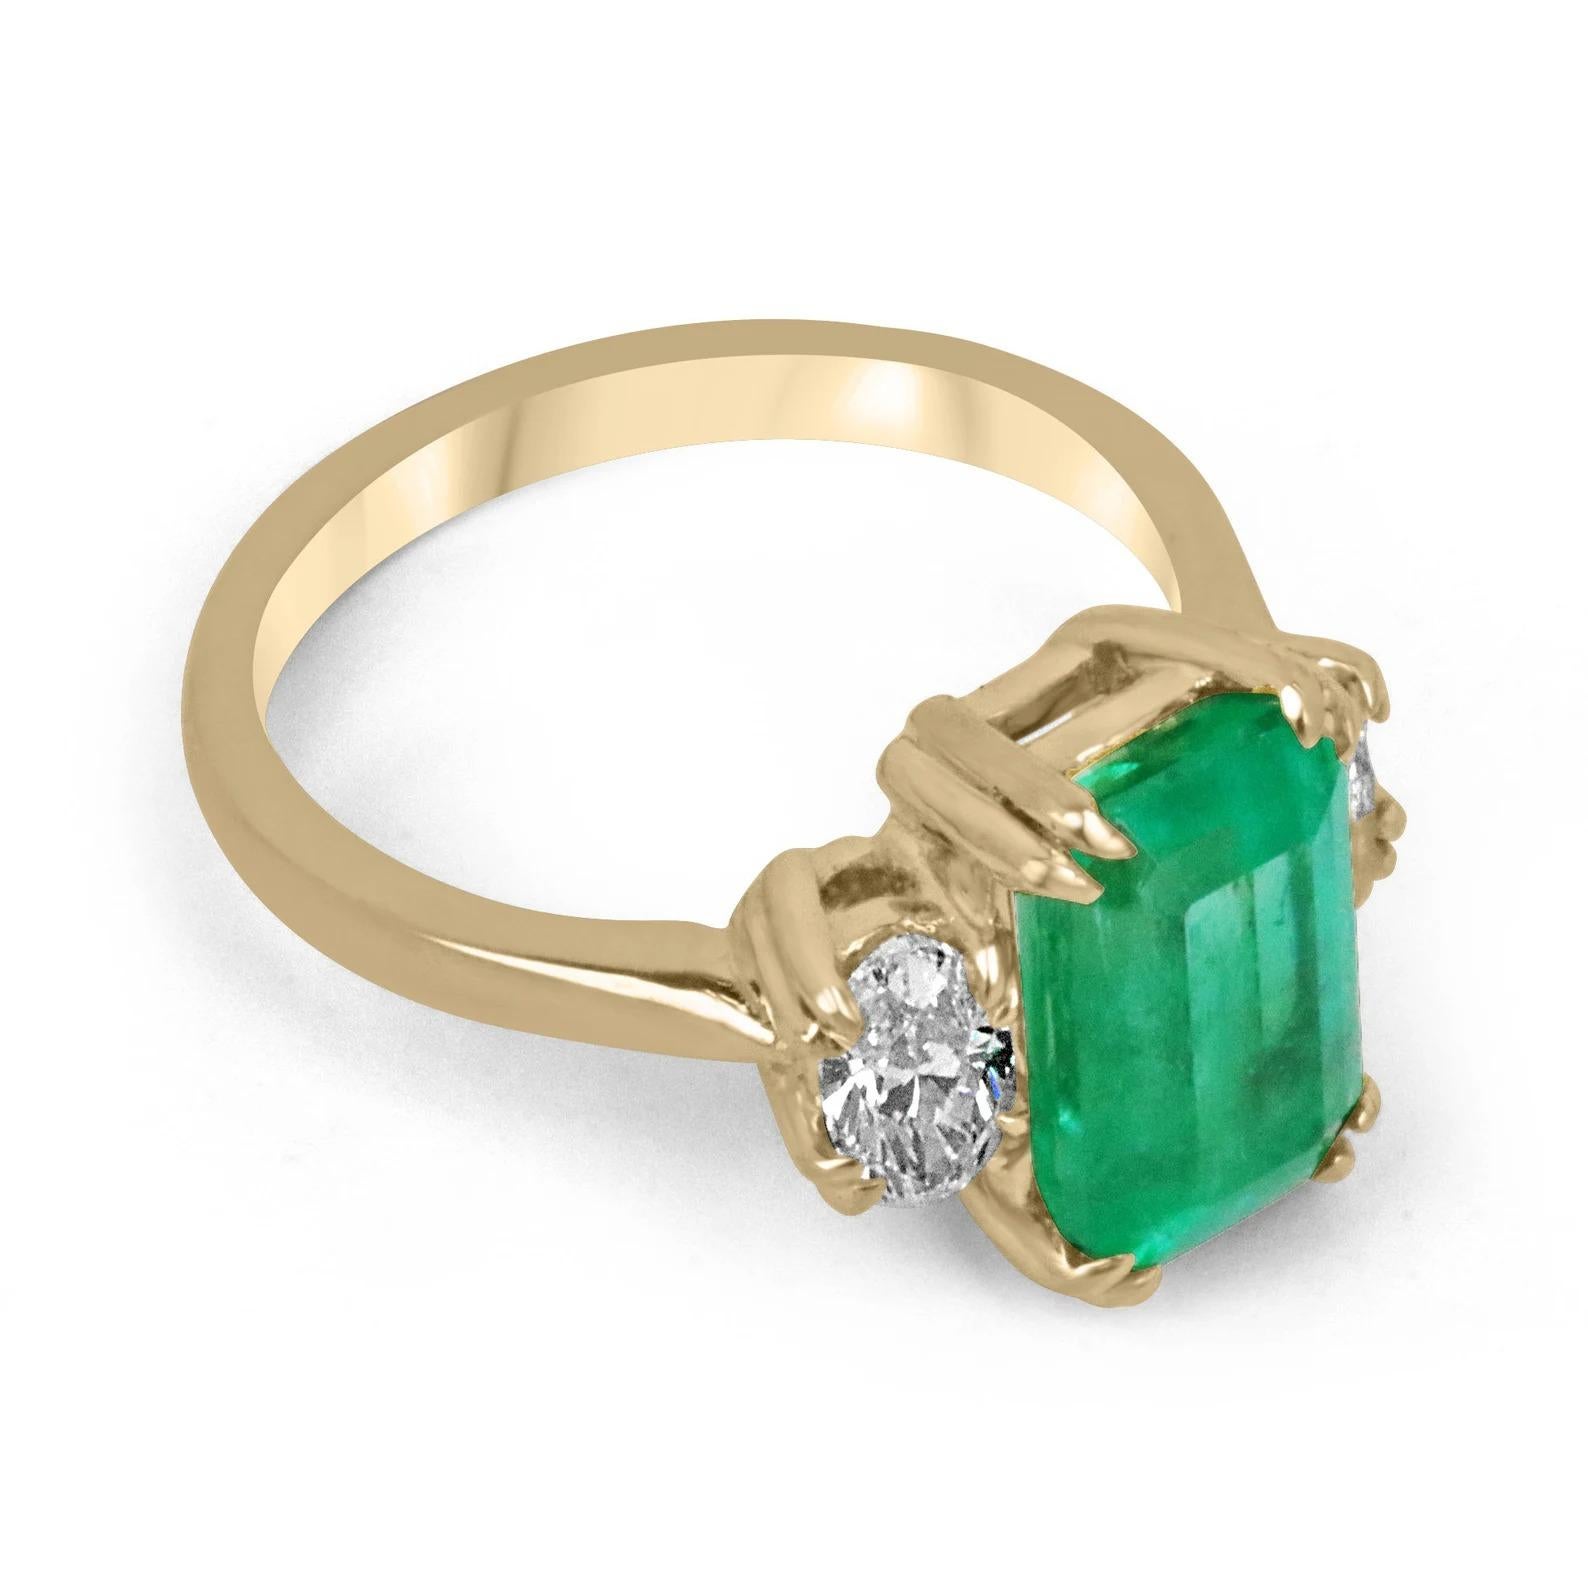 Who said love at first sight, wasn't a thing? This enthralling AAA+ TOP OF THE LINE ethically sourced Colombian emerald and oval diamond three-stone speaks for itself. The center stone features a captivating 3.44-carat, natural emerald cut Colombian